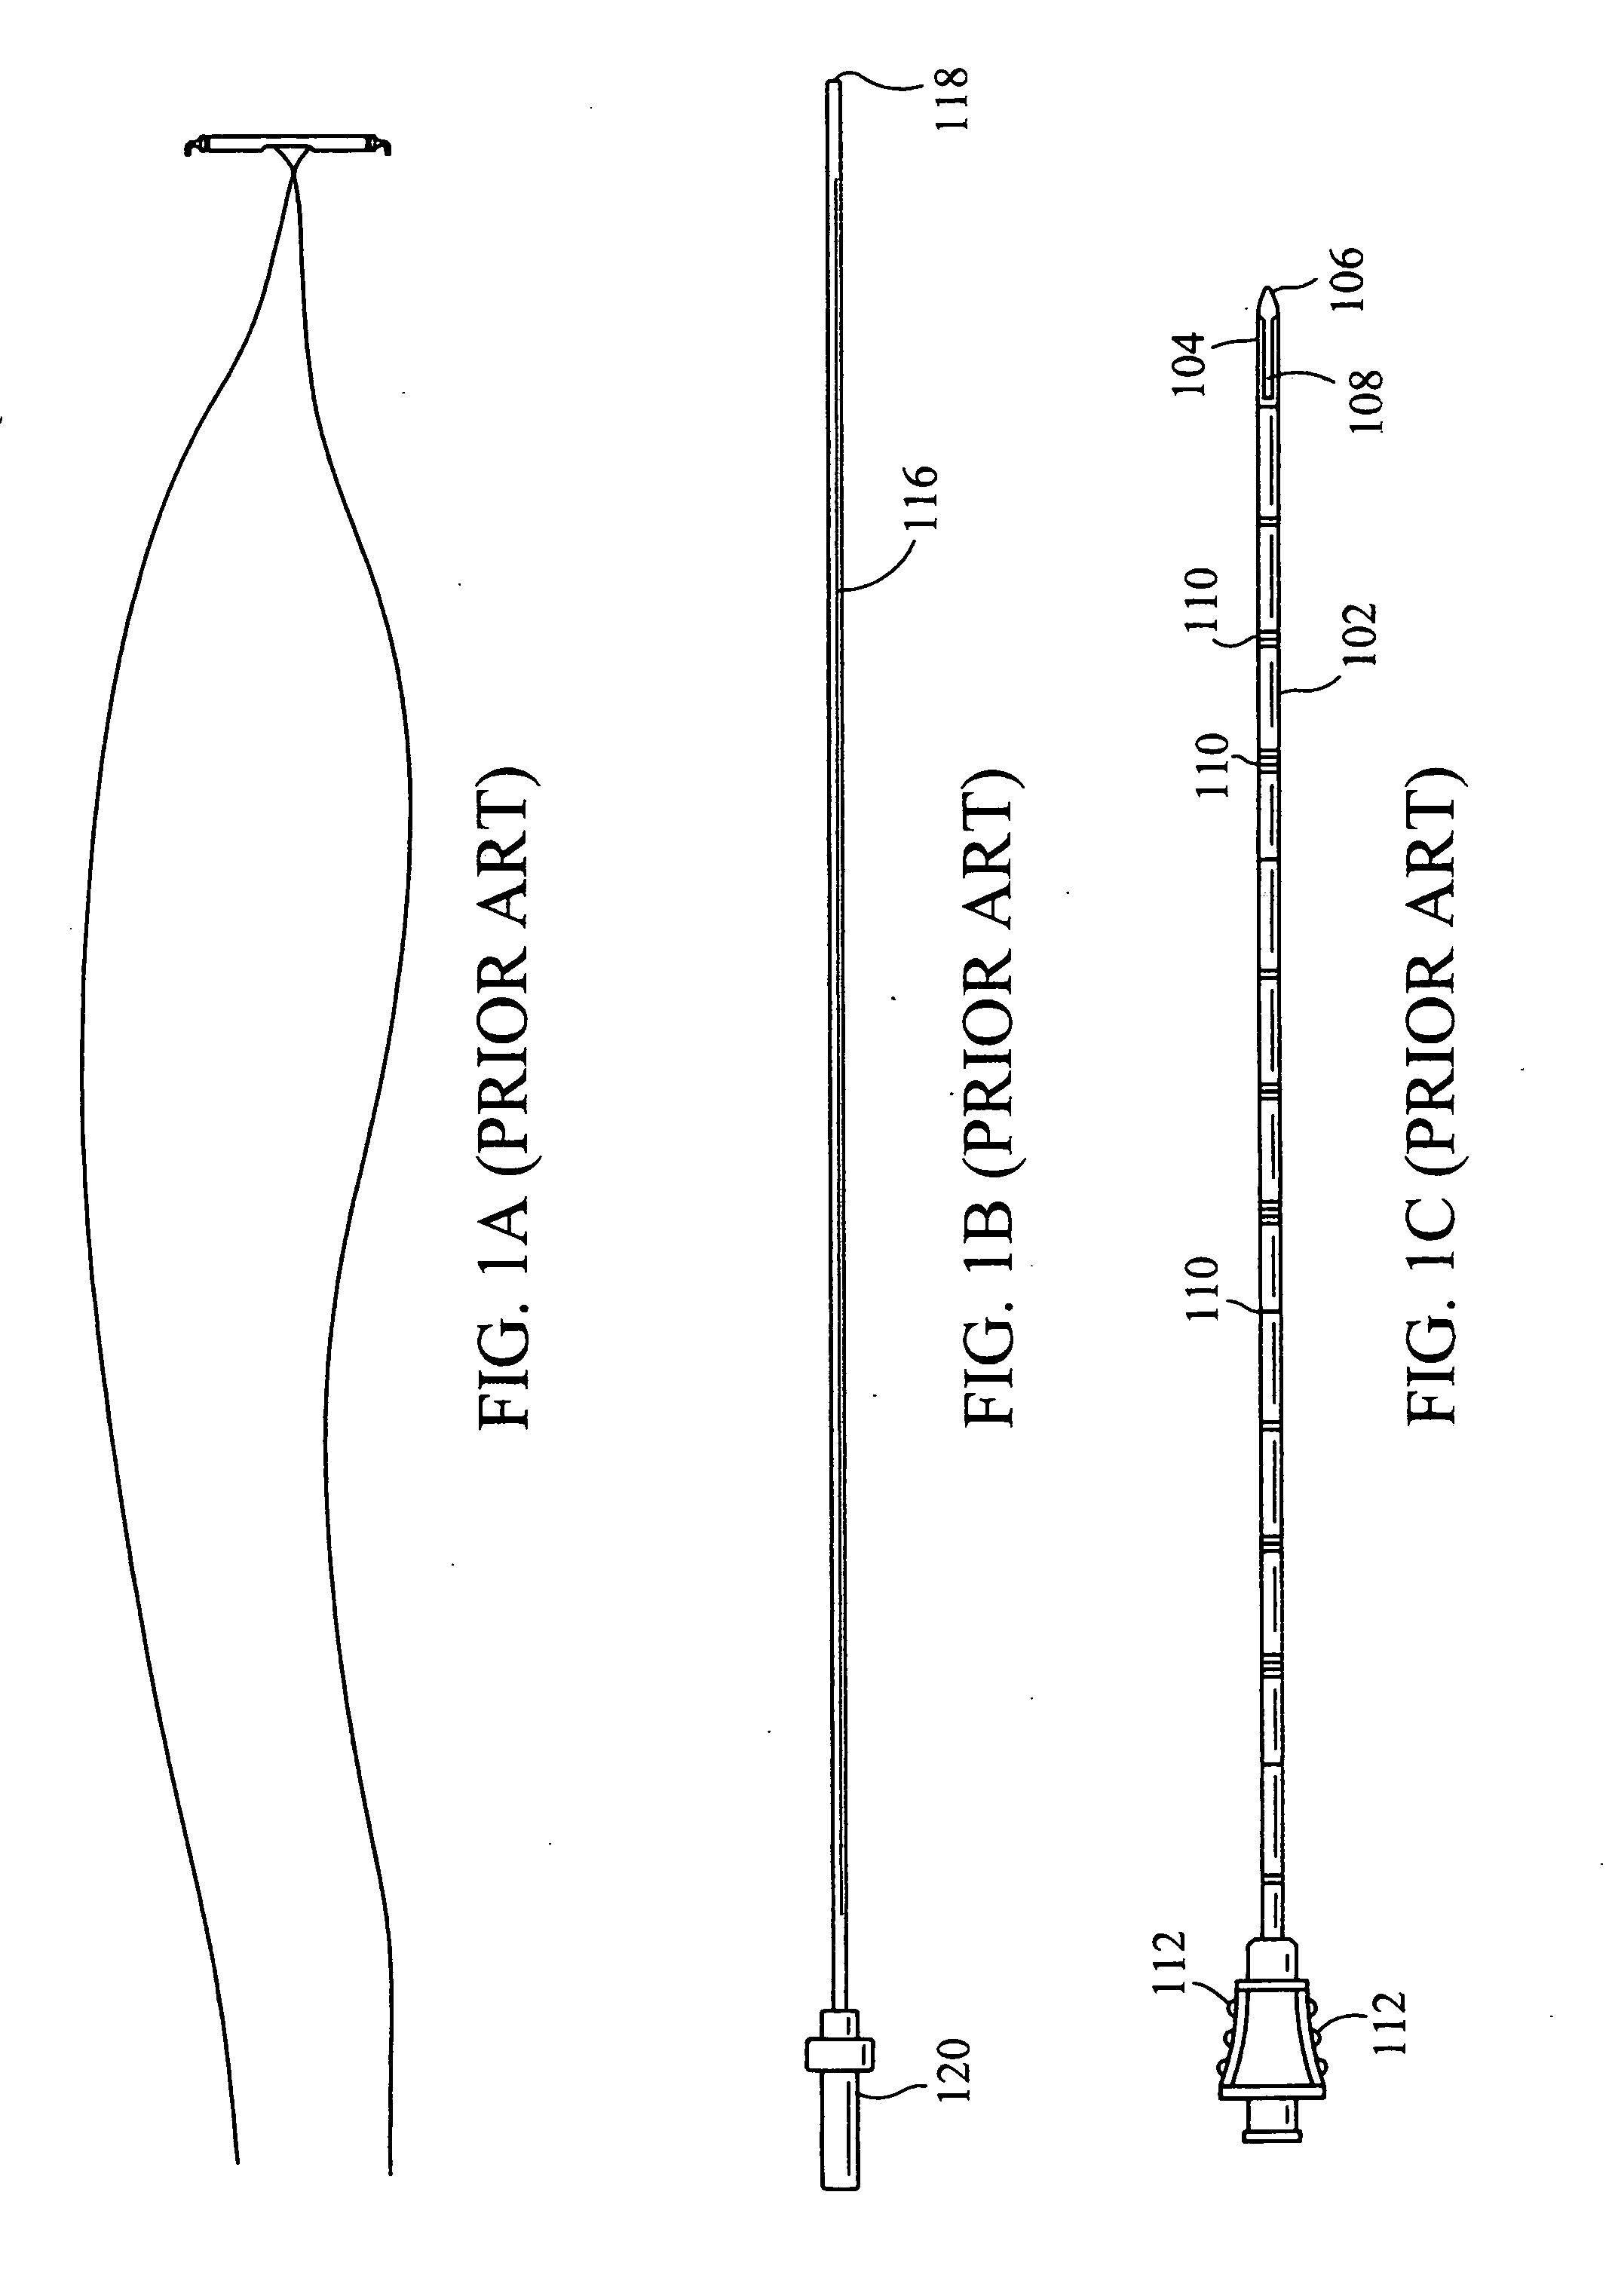 Apparatus and method for incision-free vaginal prolapse repair